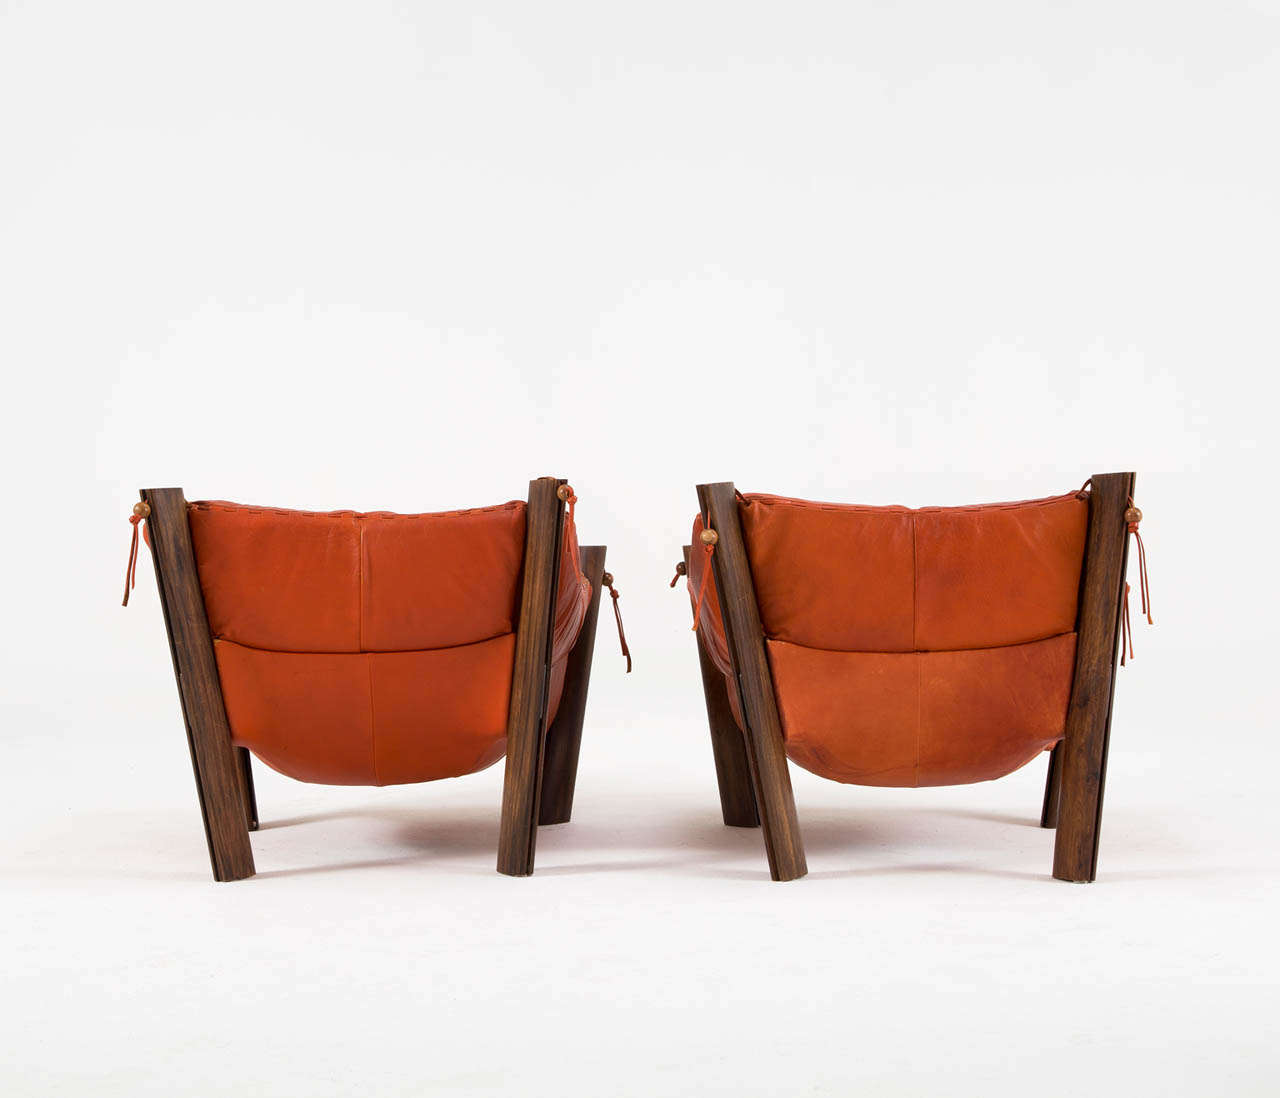 Mid-20th Century Percival Lafer Rare Pair of Brazilian Lounge Chairs in Orange Leather